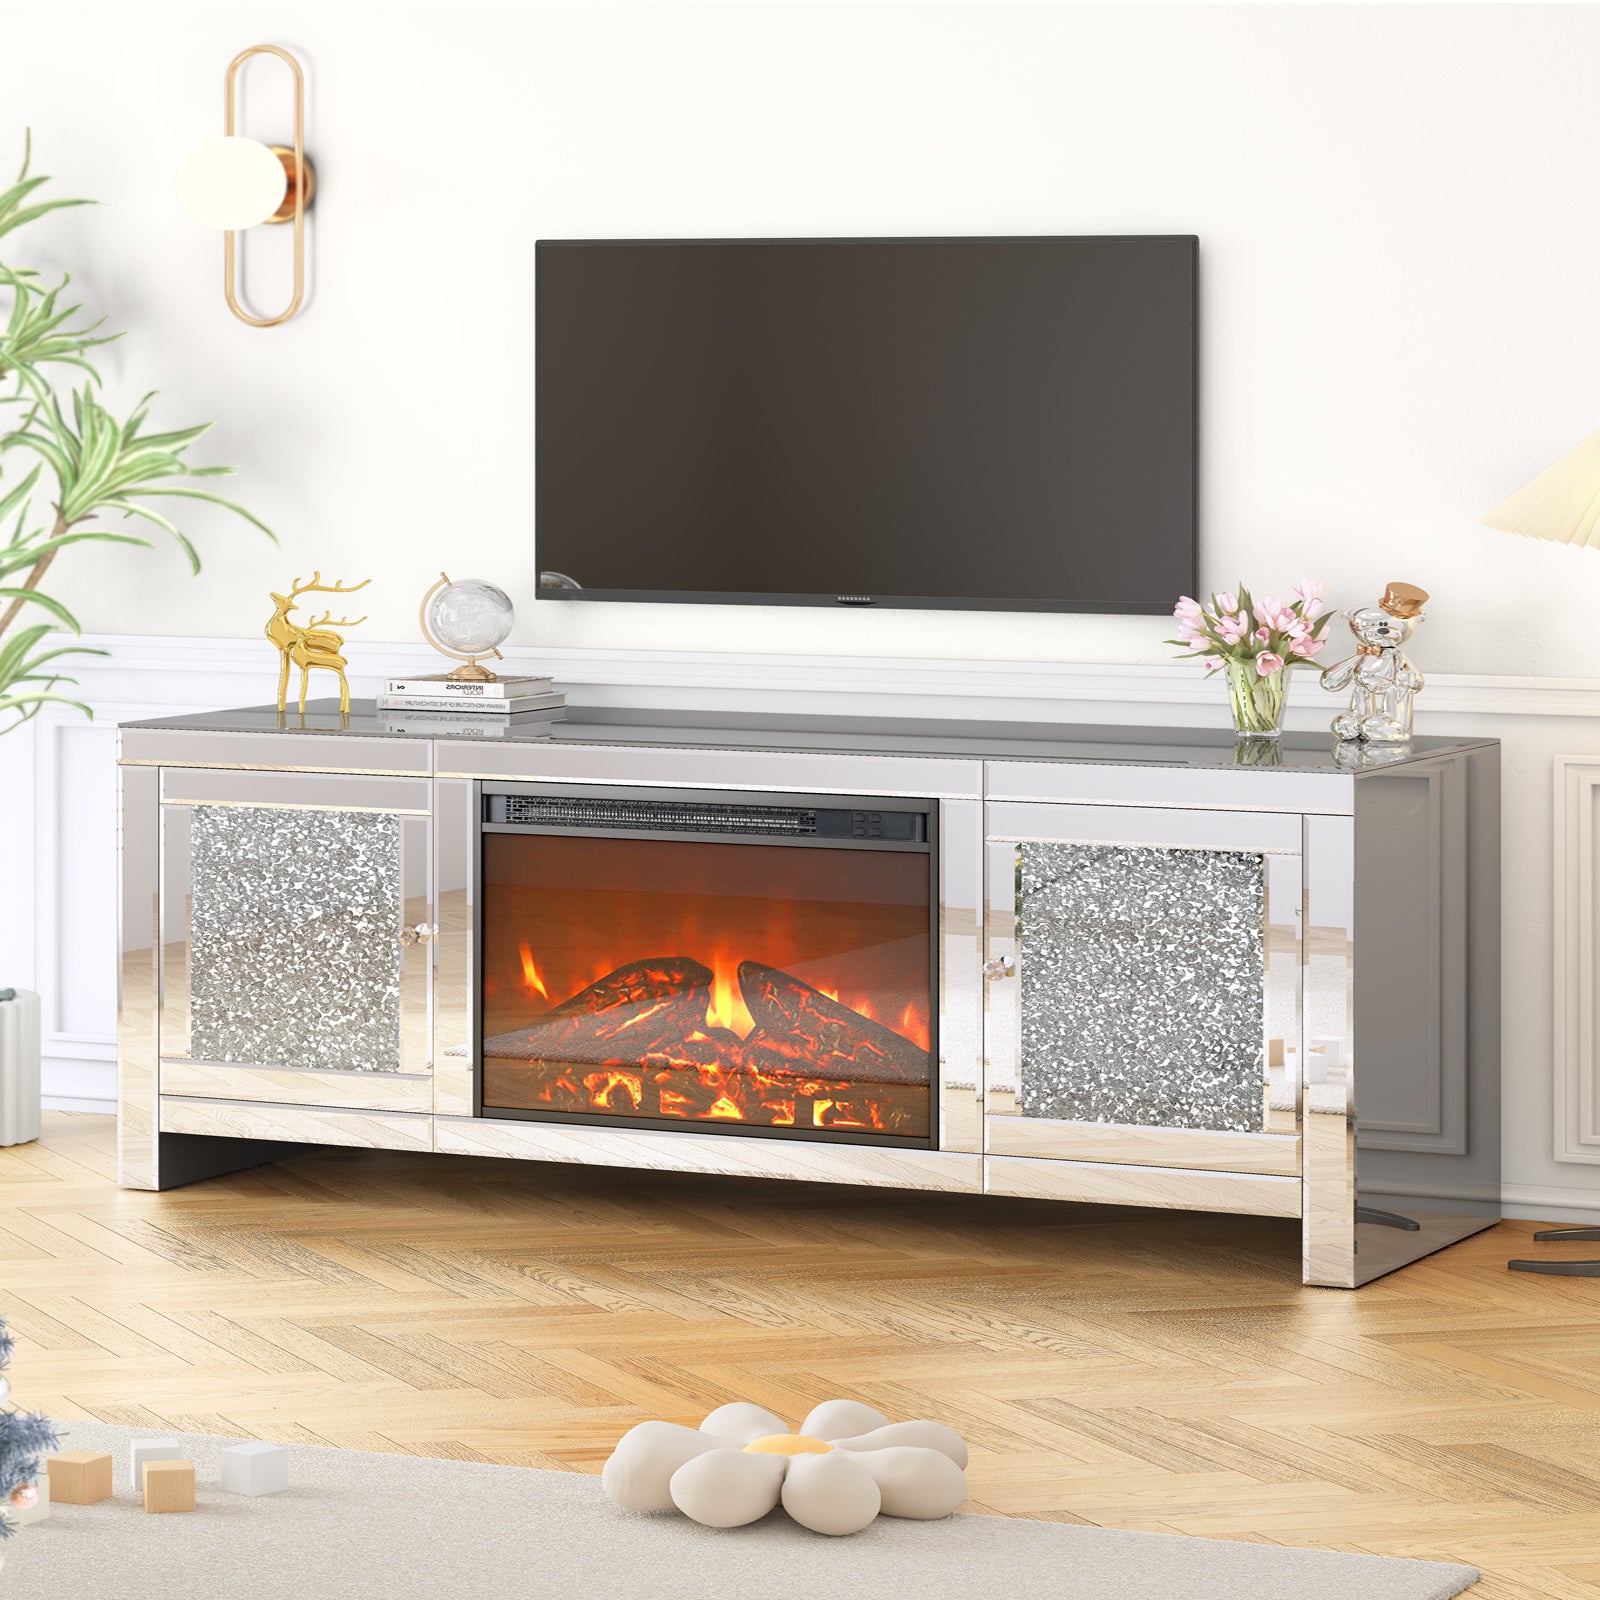 Mjkone Mirrored TV Stand, Mirrored Electric Fireplace Tv Stand, Mantel Freestanding Heater & 7 Colors 3D Realistic Flame Effect, Entertainment Center Furniture for Living Room, Silver